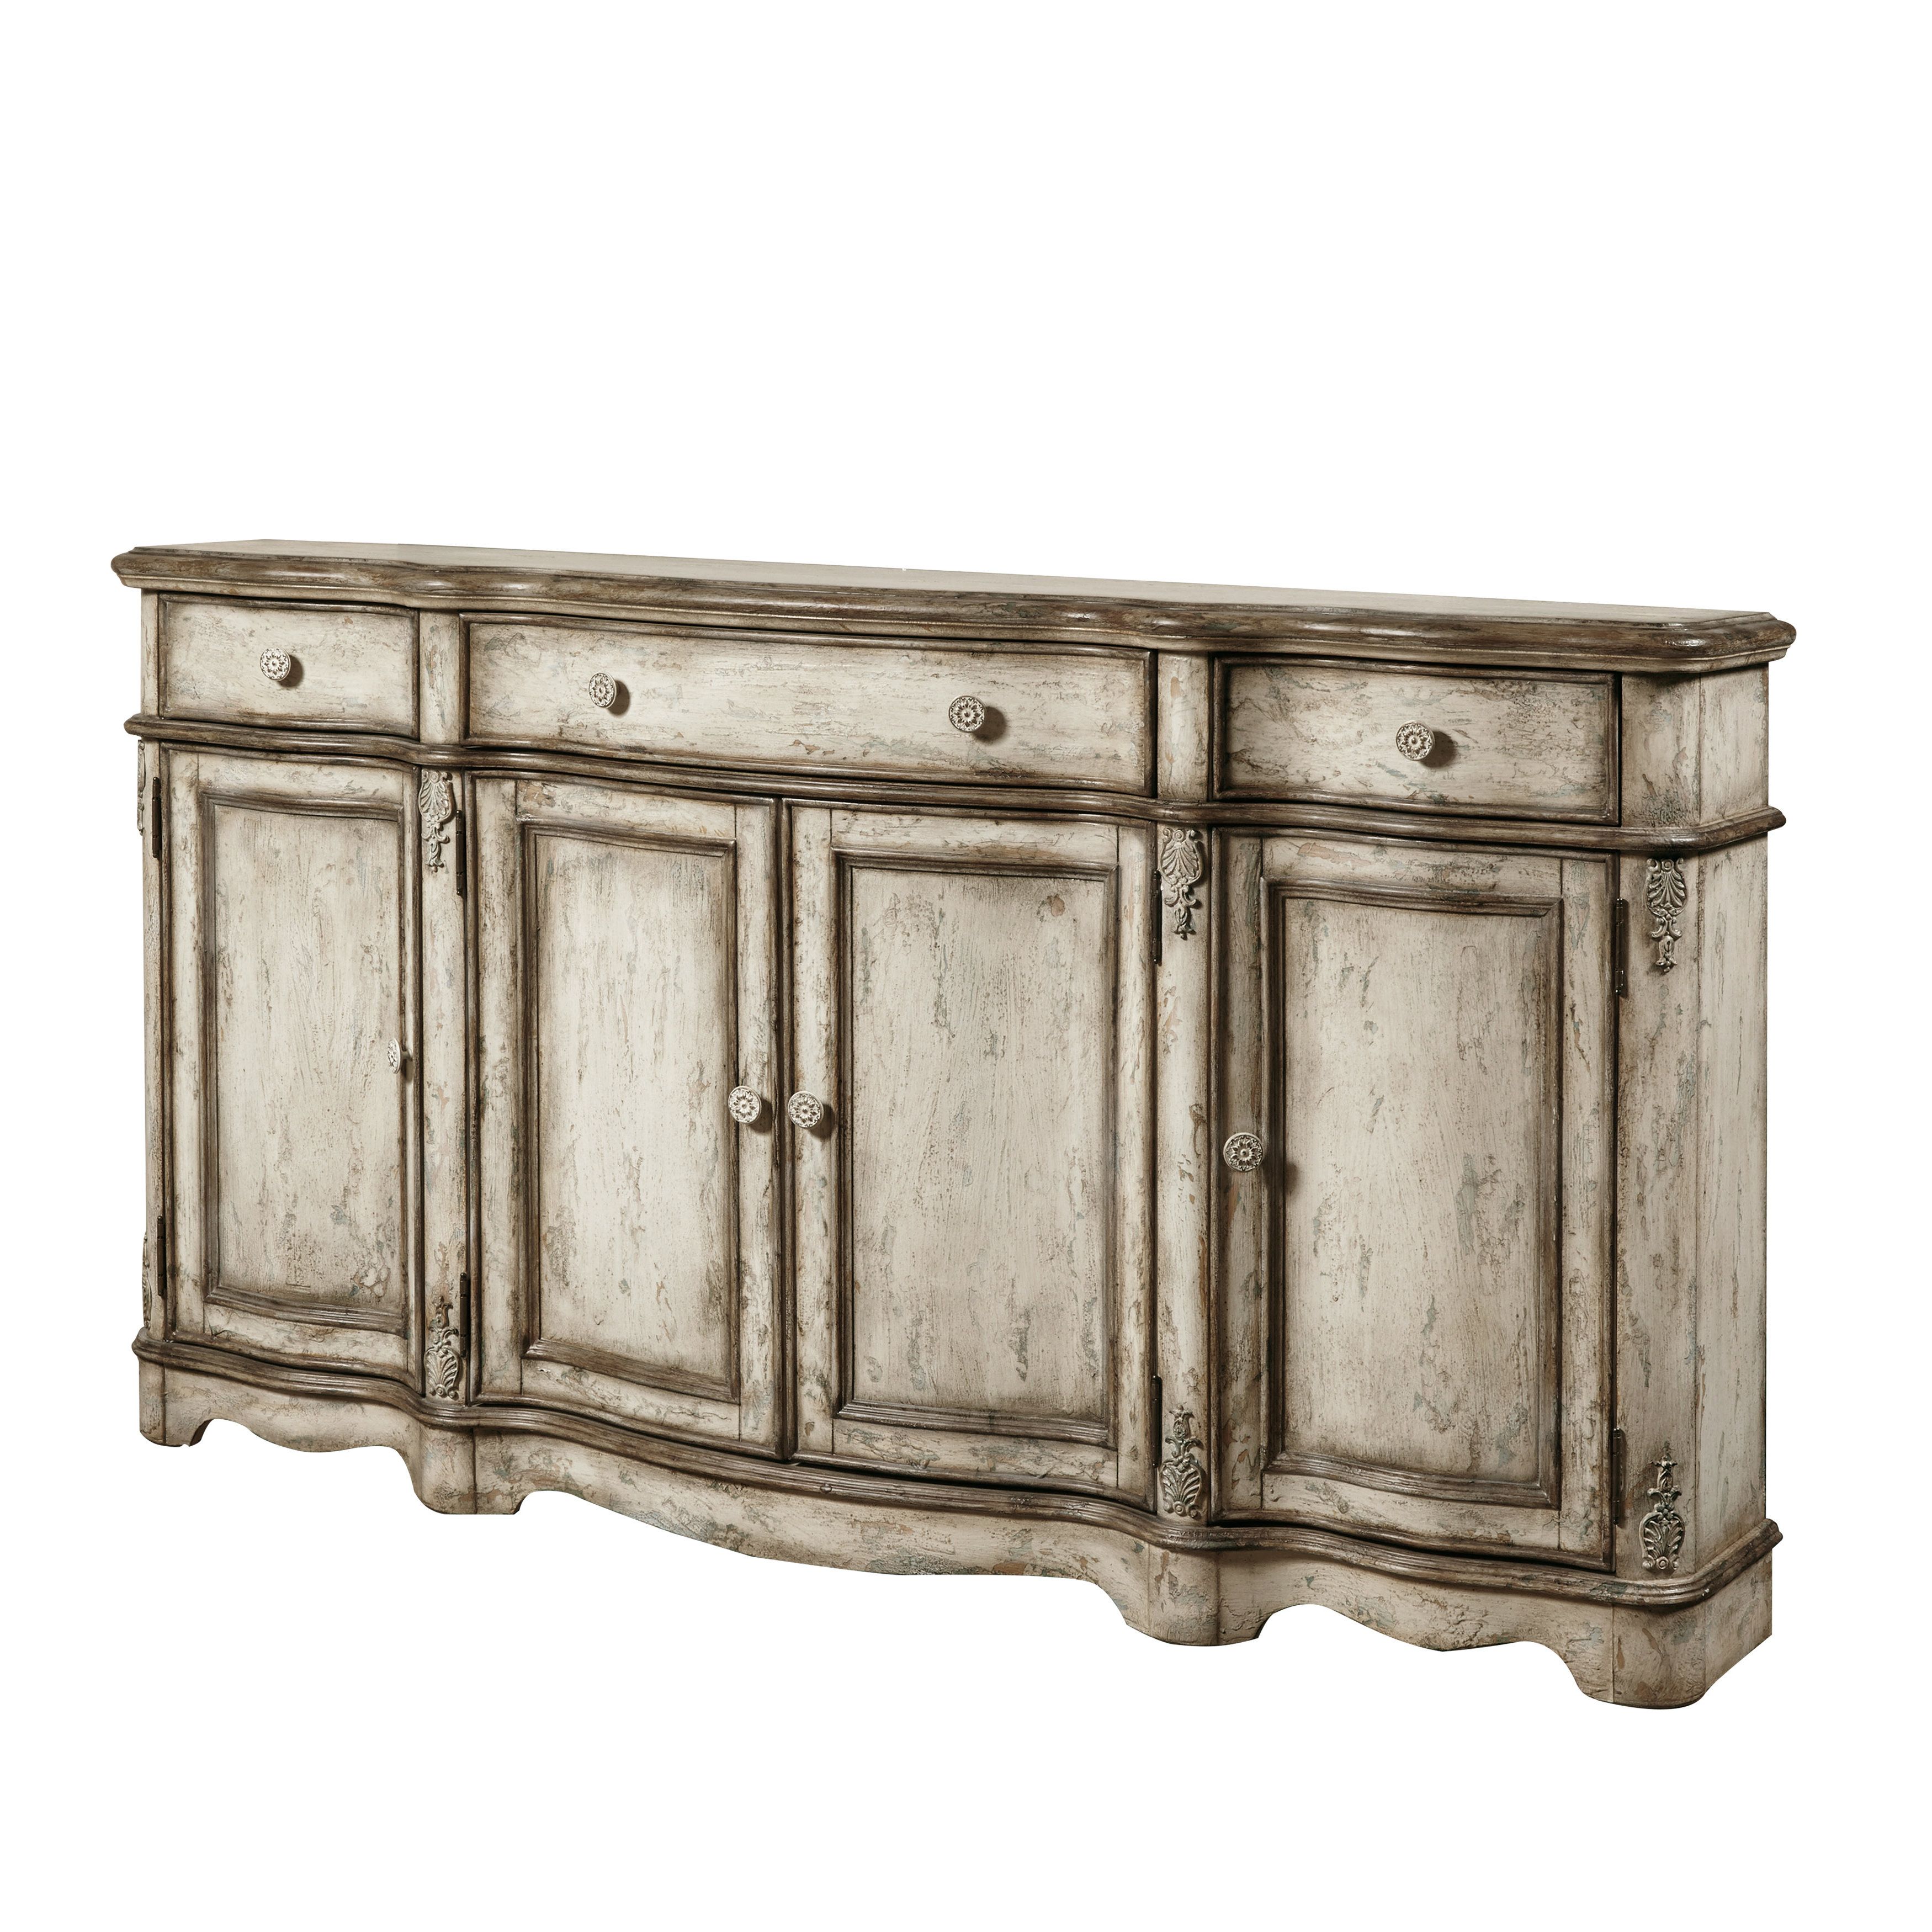 Farmhouse & Rustic Sideboard / Credenza Sideboards & Buffets Inside Most Up To Date Sayles Sideboards (View 10 of 20)